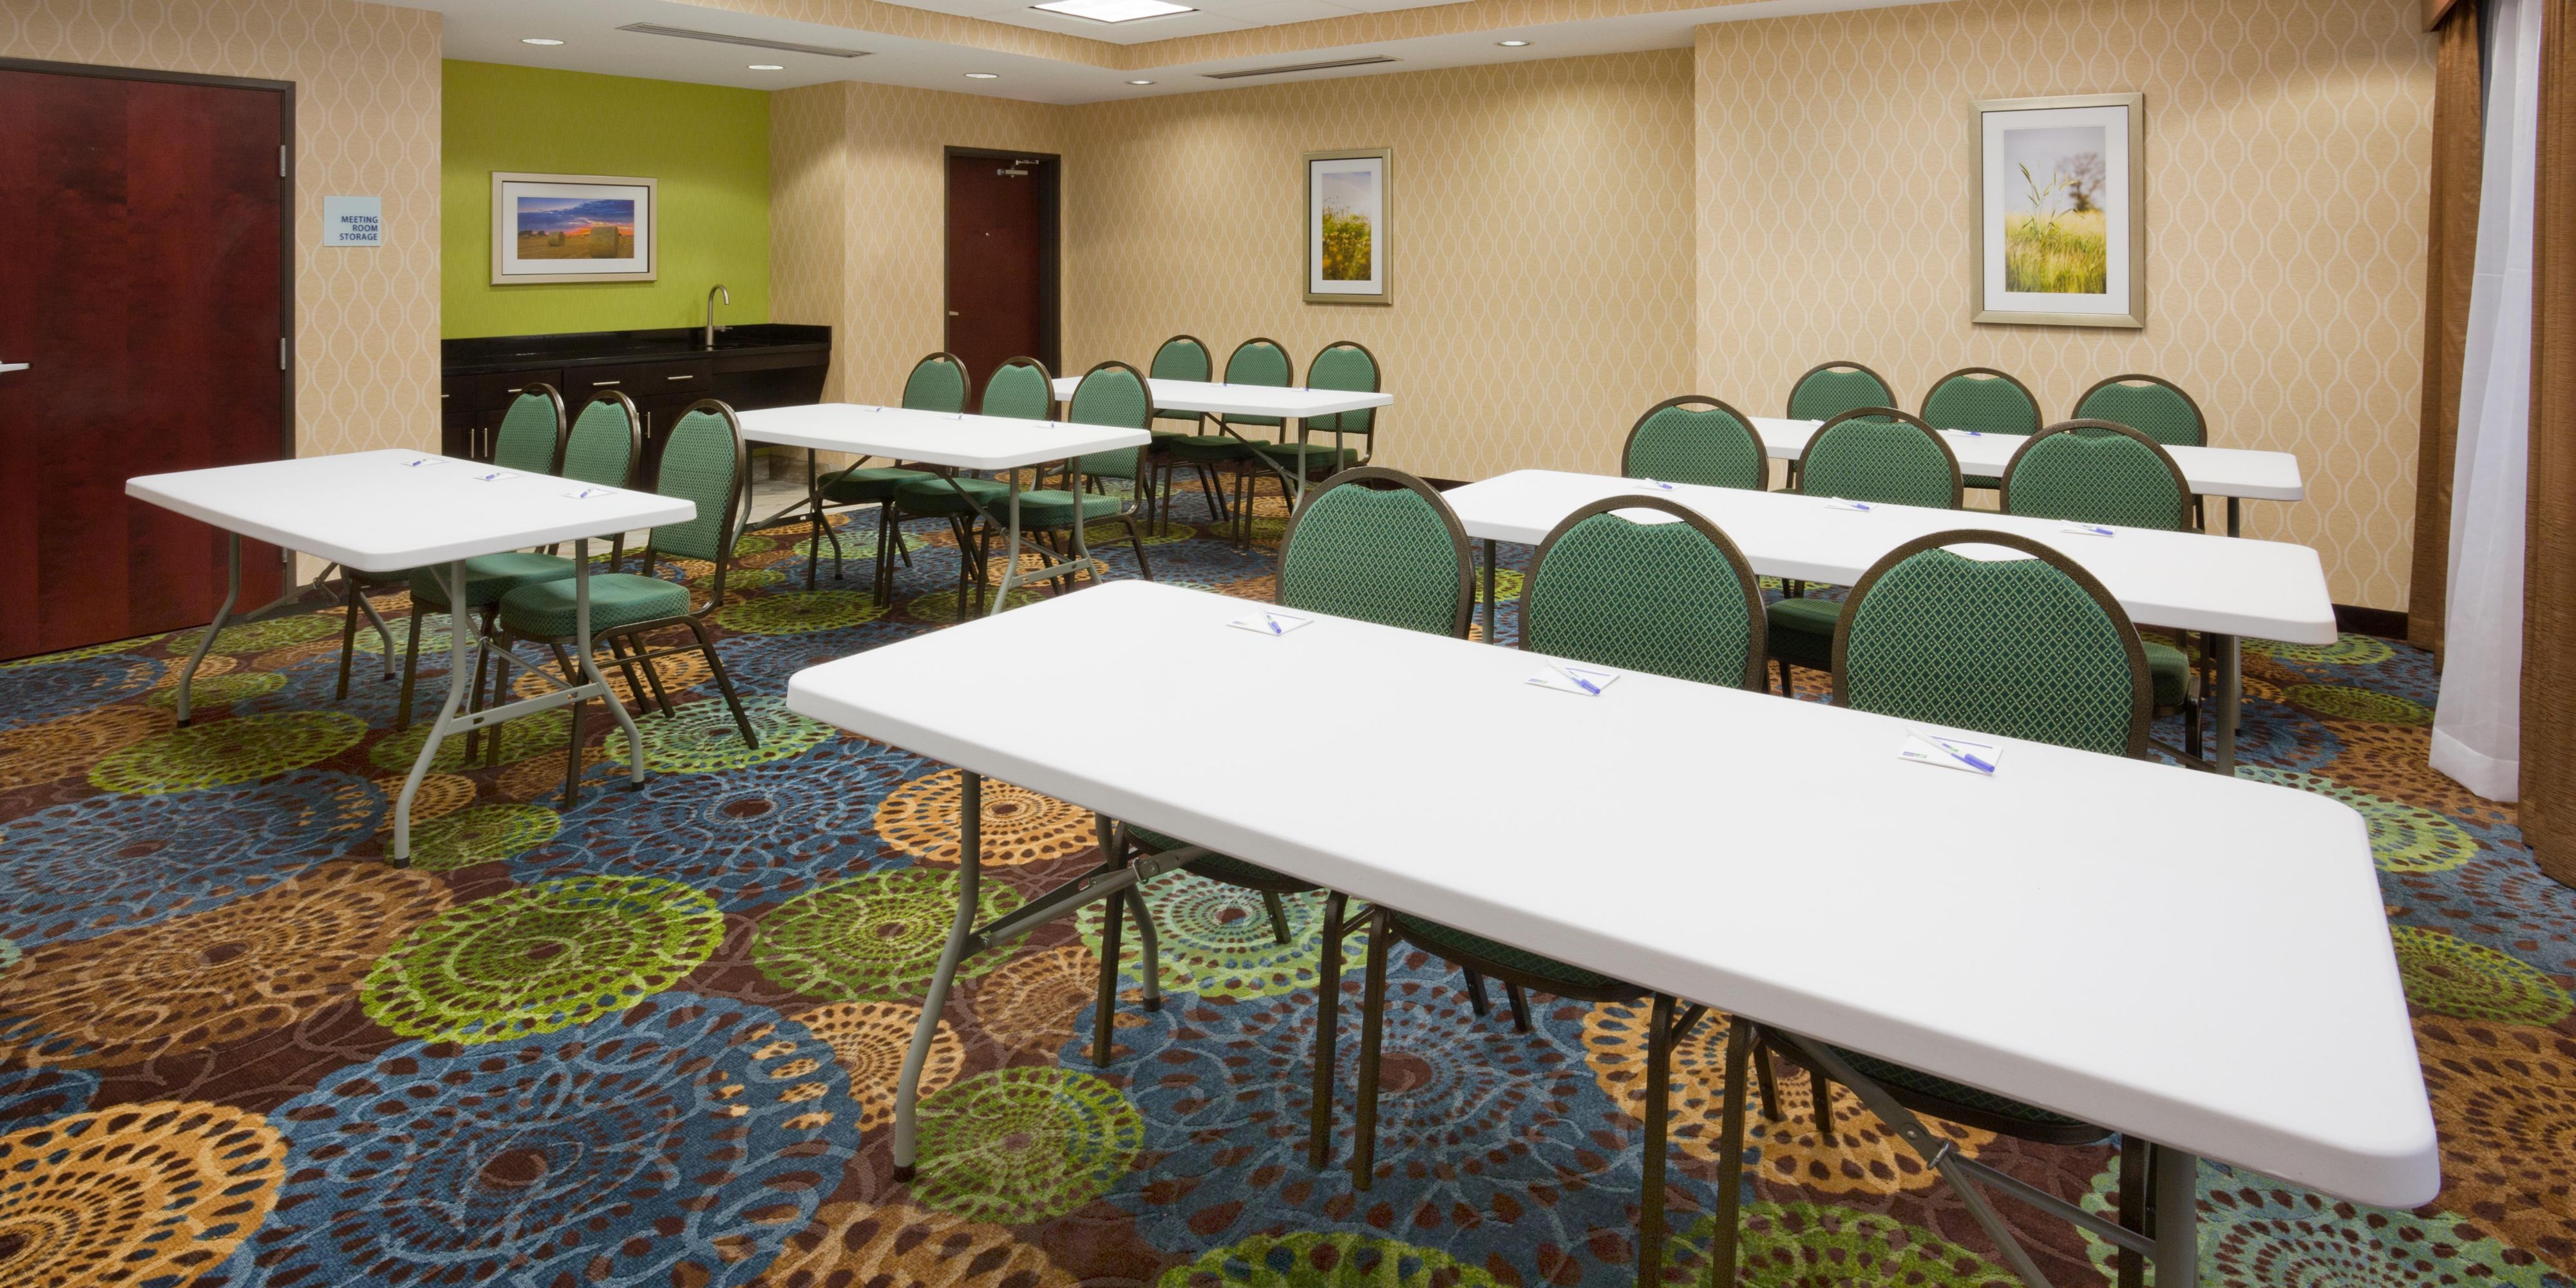 Do you need meeting space in the Quad Cities Area? Let us help. Our event space can hold up to 40 people. We are an ideal meeting space if you are traveling to Davenport, since ware are near several major businesses including John Deere and Rock Island Arsenal. Give our meeting professional a call to discuss your next gathering.
